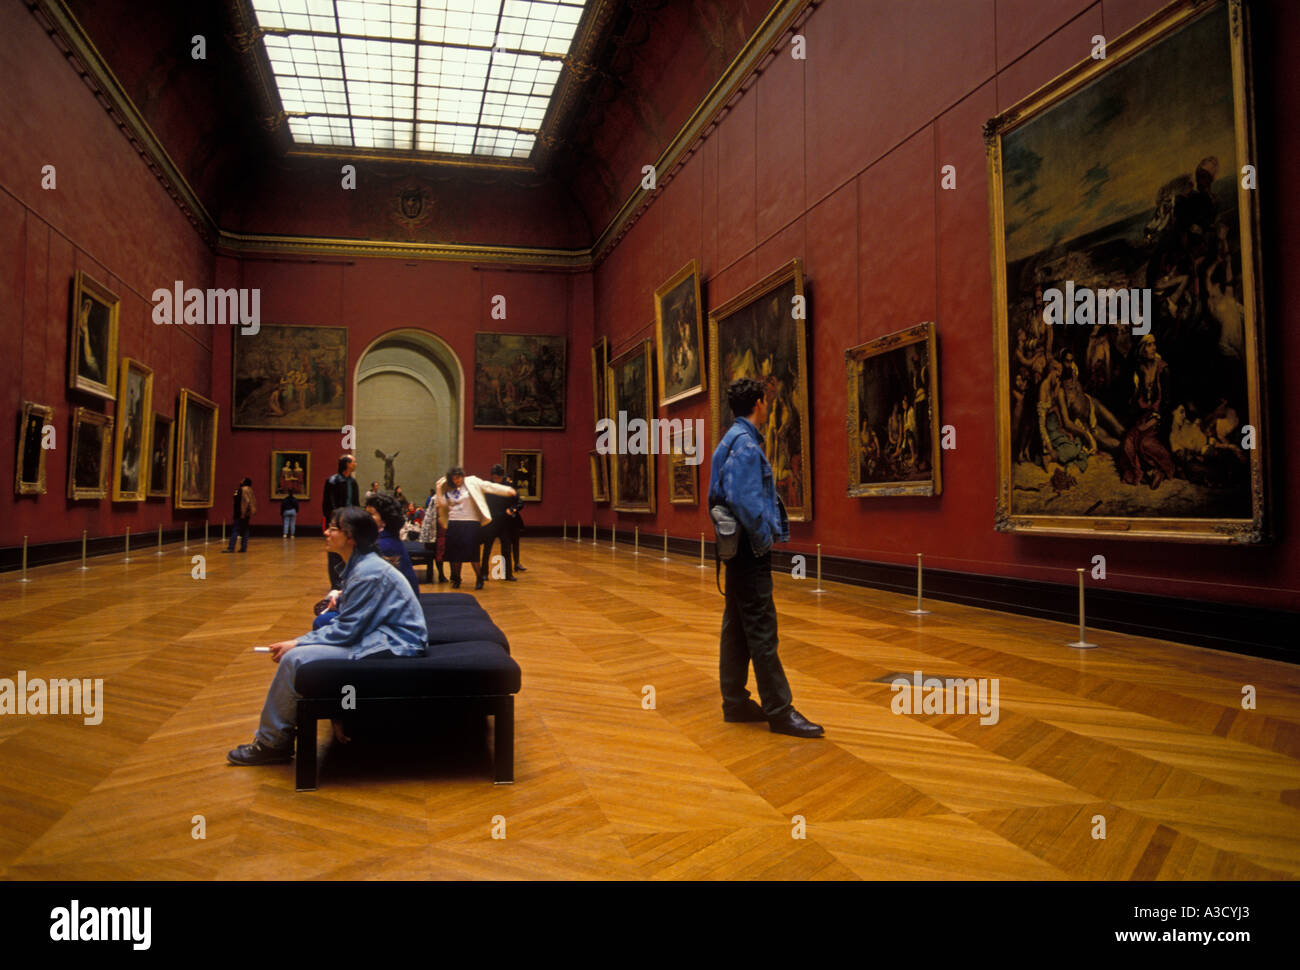 people, tourists, visitors, visiting, Grande Galerie, Denon Gallery, Louvre Museum, Musee du Louvre, Paris, France, Europe Stock Photo